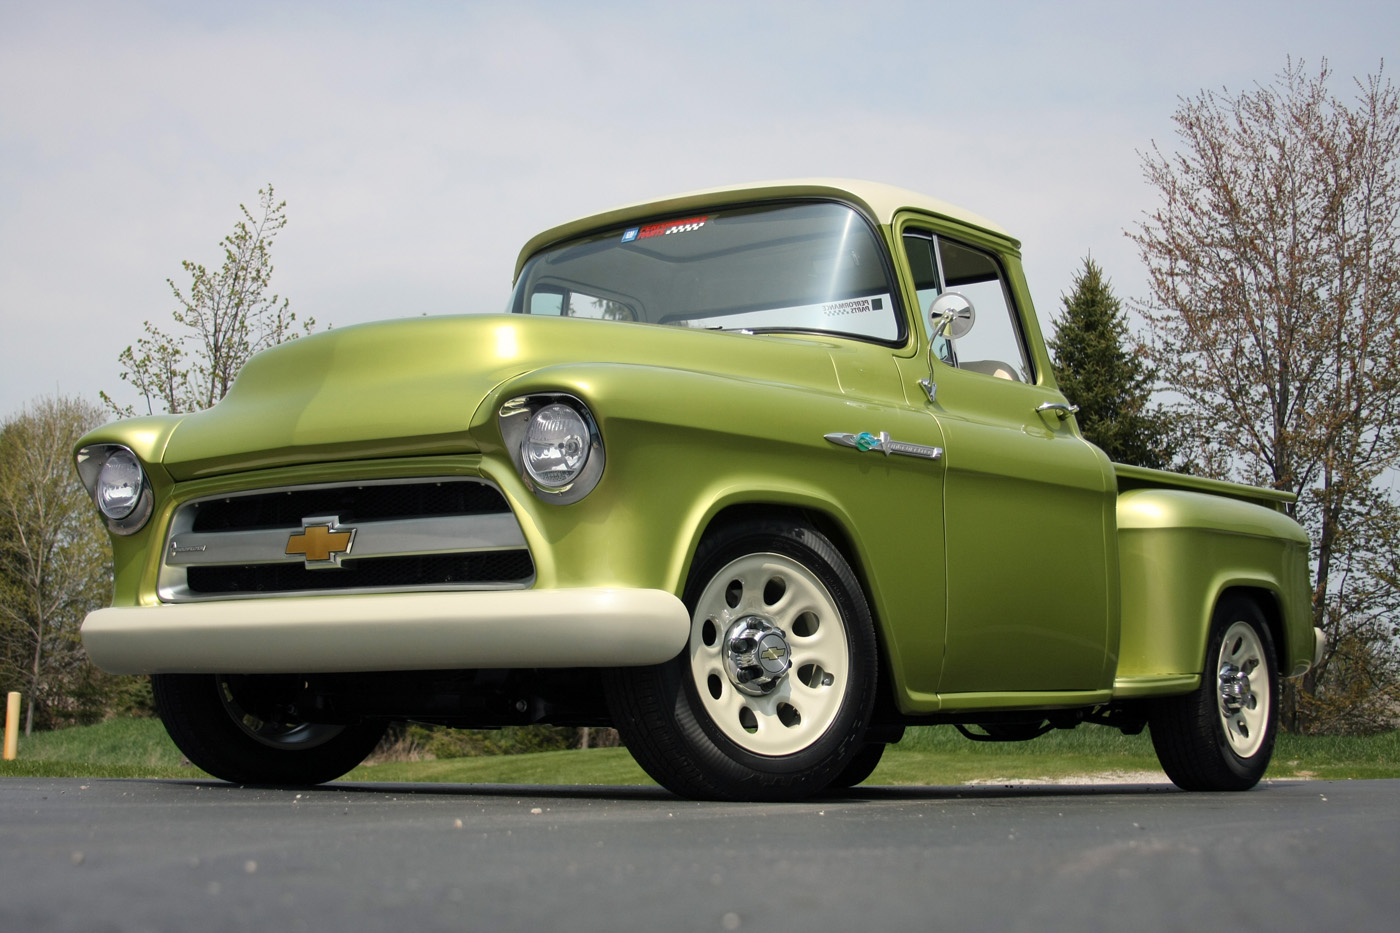 1955 CHEVROLET E ROD PICKUP Wallpaper and Background Image 1400x933